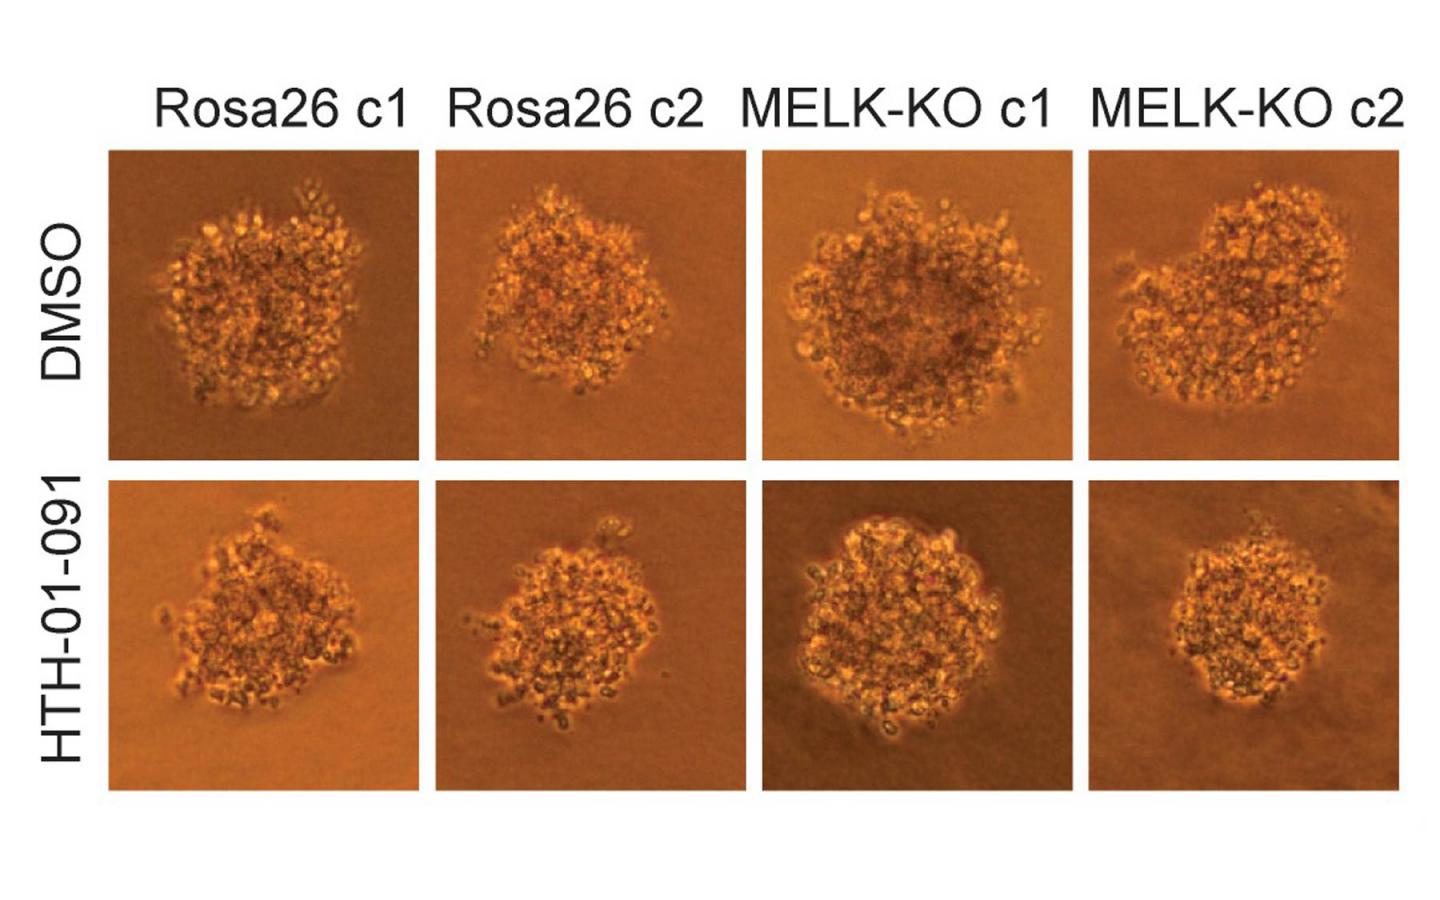 The growth of human colon cancer cells (raised in culture) is unaffected by the MELK gene. Top row: untreated cells; bottom row: cells treated with a MELK inhibitor drug. Left two columns, control cells; right two columns, cells in which MELK gene has been knocked out. CSHL researchers conclude that MELK is not involved in cancer proliferation. [Sheltzer Lab, CSHL]